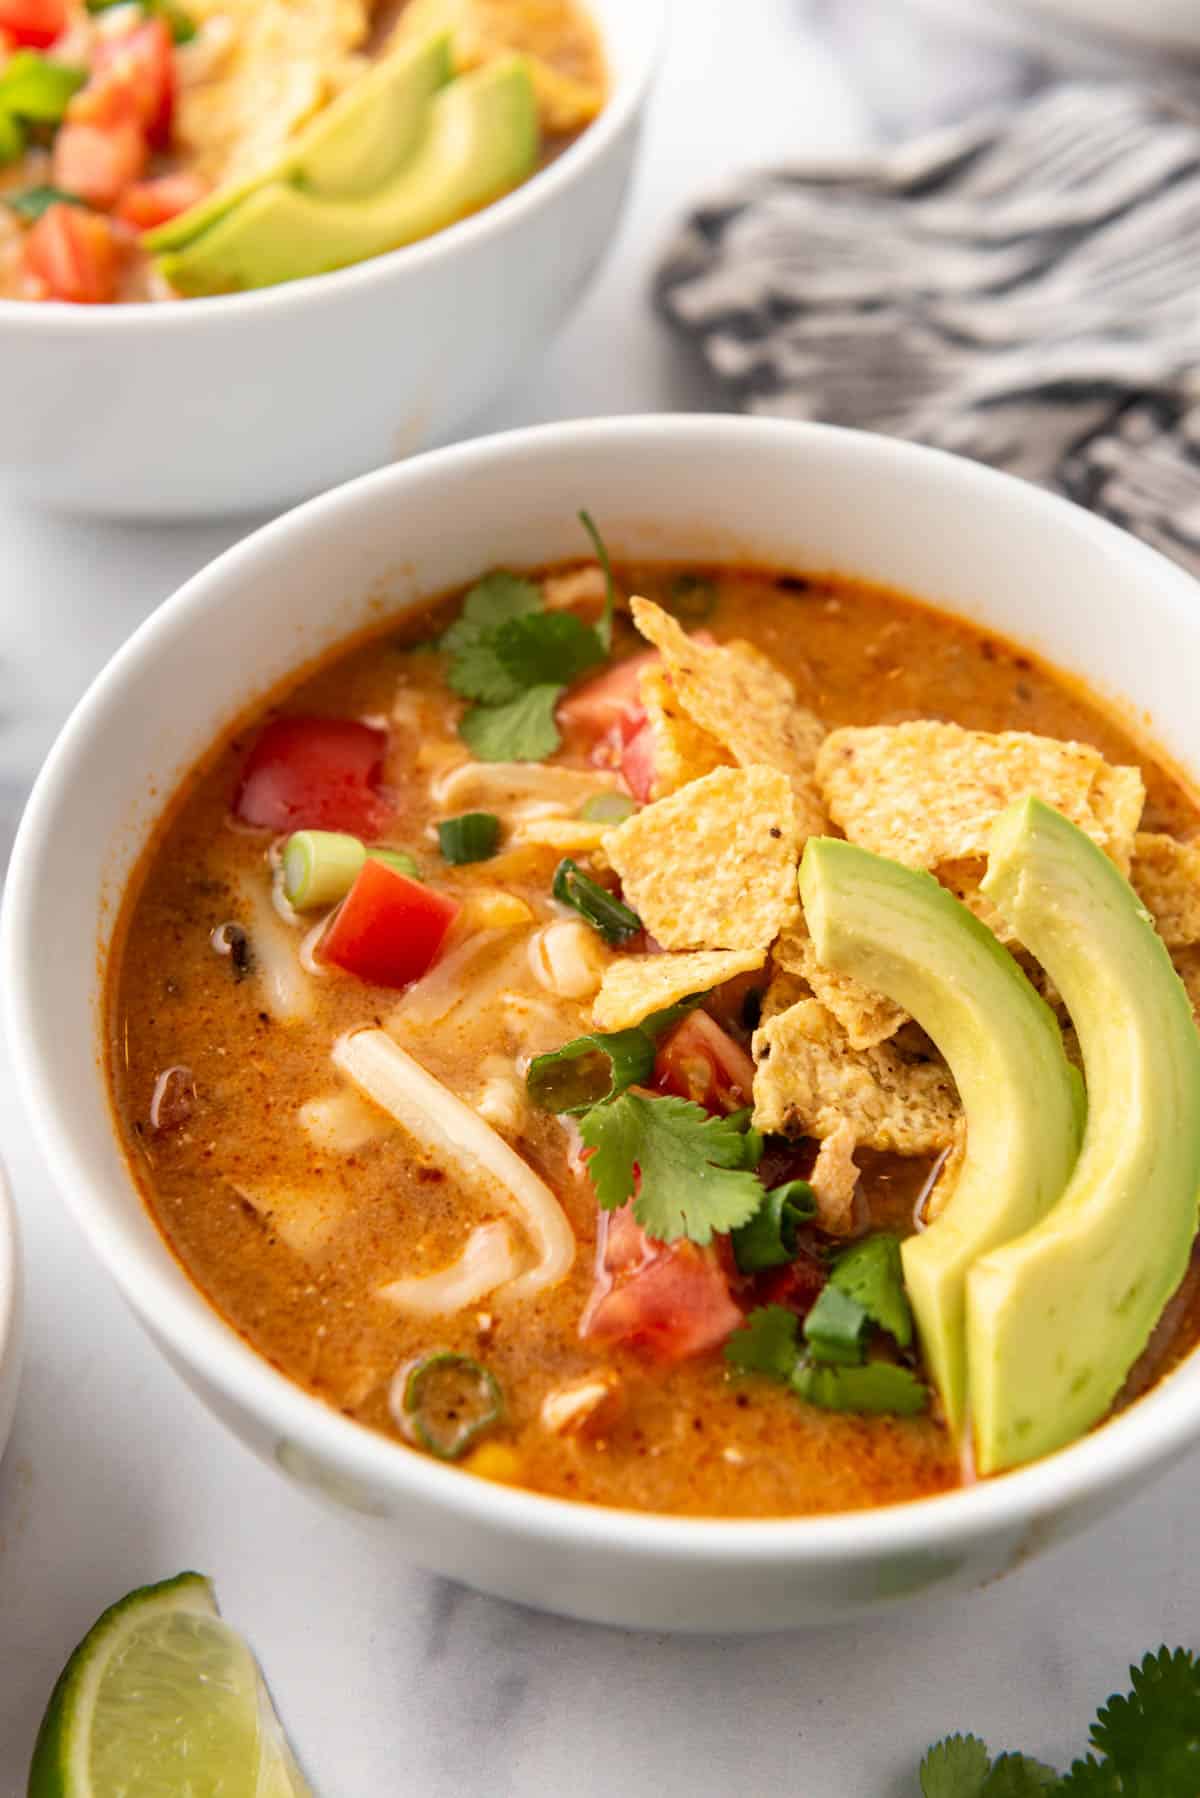 A bowl of homemade chicken tortilla soup with tortilla chips and sliced avocados on top.